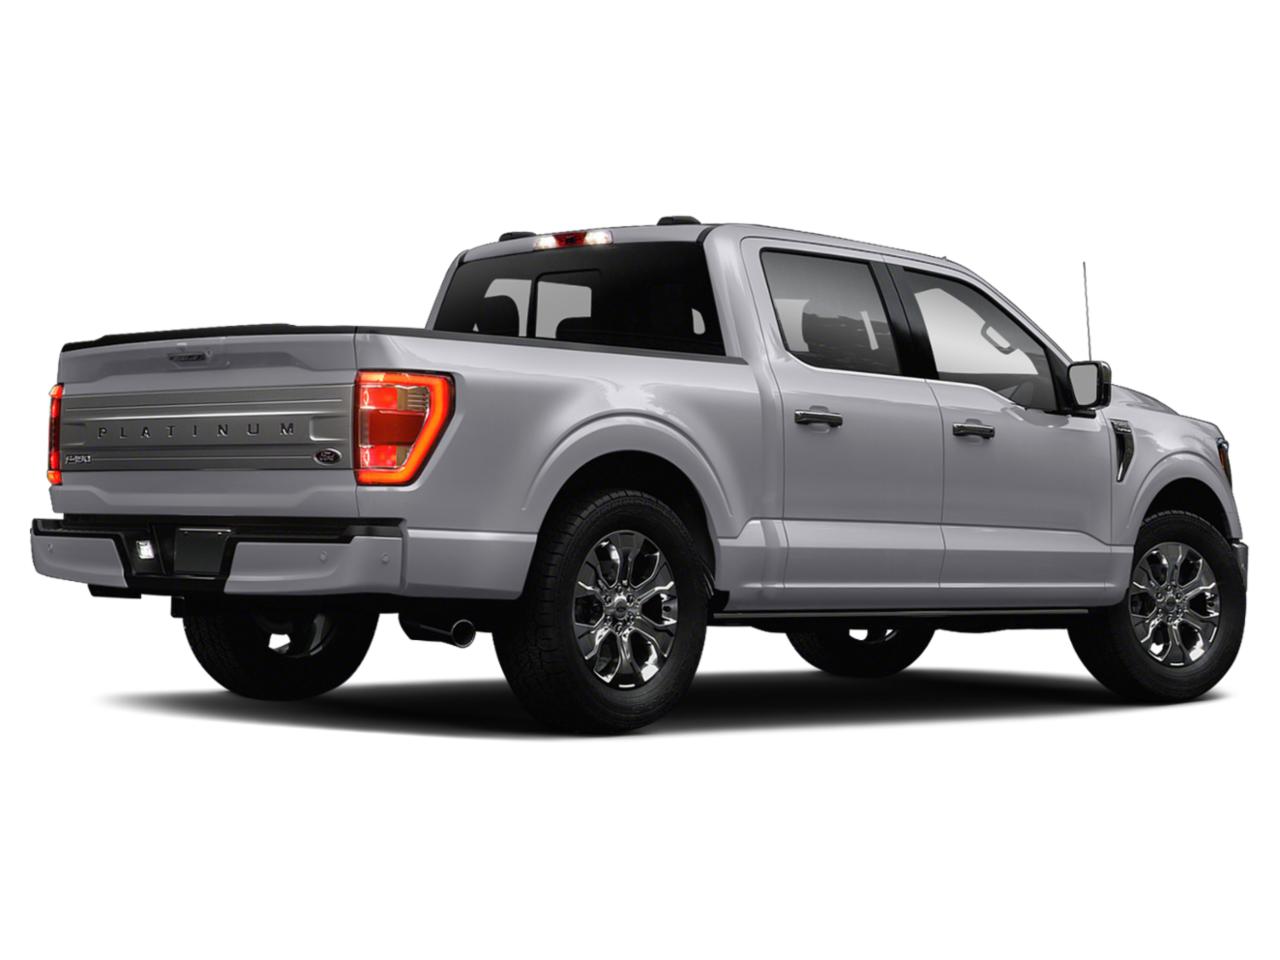 Space White Metallic 2021 Ford F150 Truck for sale at